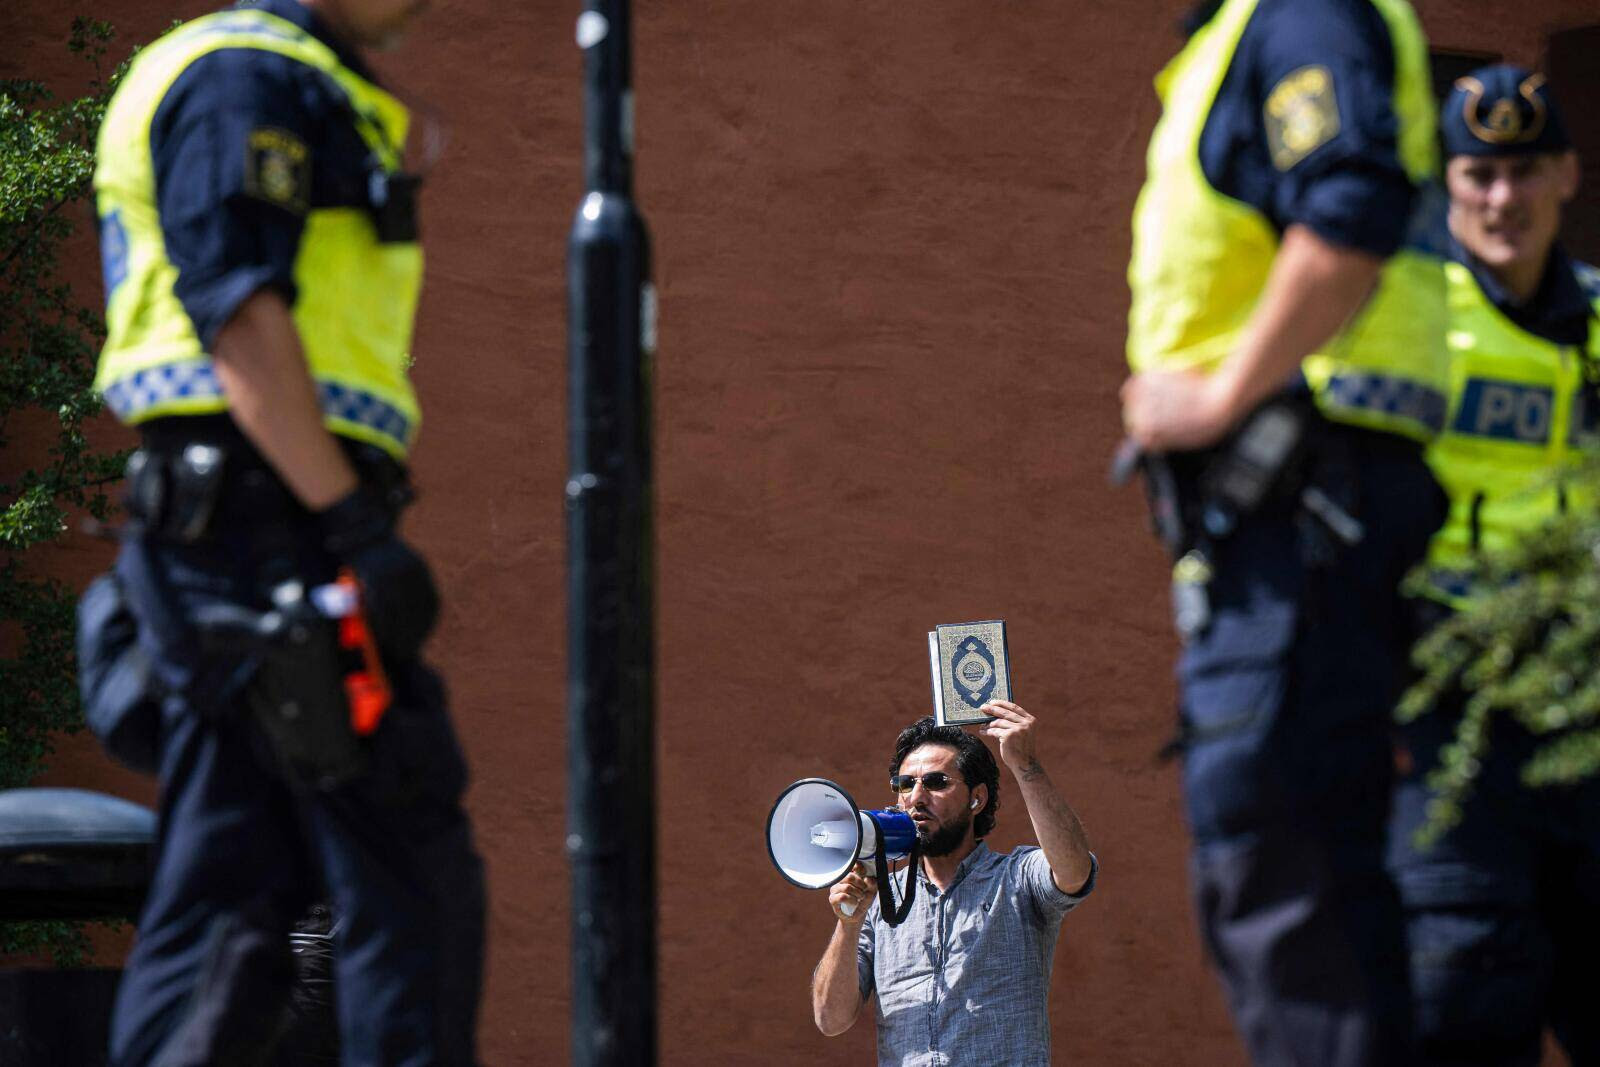 TOPSHOT - Salwan Momika protests outside a mosque in Stockholm on June 28, 2023, during the Eid al-Adha holiday. Momika, 37, who fled from Iraq to Sweden several years ago, was granted permission by the Swedish police to burn the Muslim holy book during the demonstration. (Photo by Jonathan NACKSTRAND / AFP)